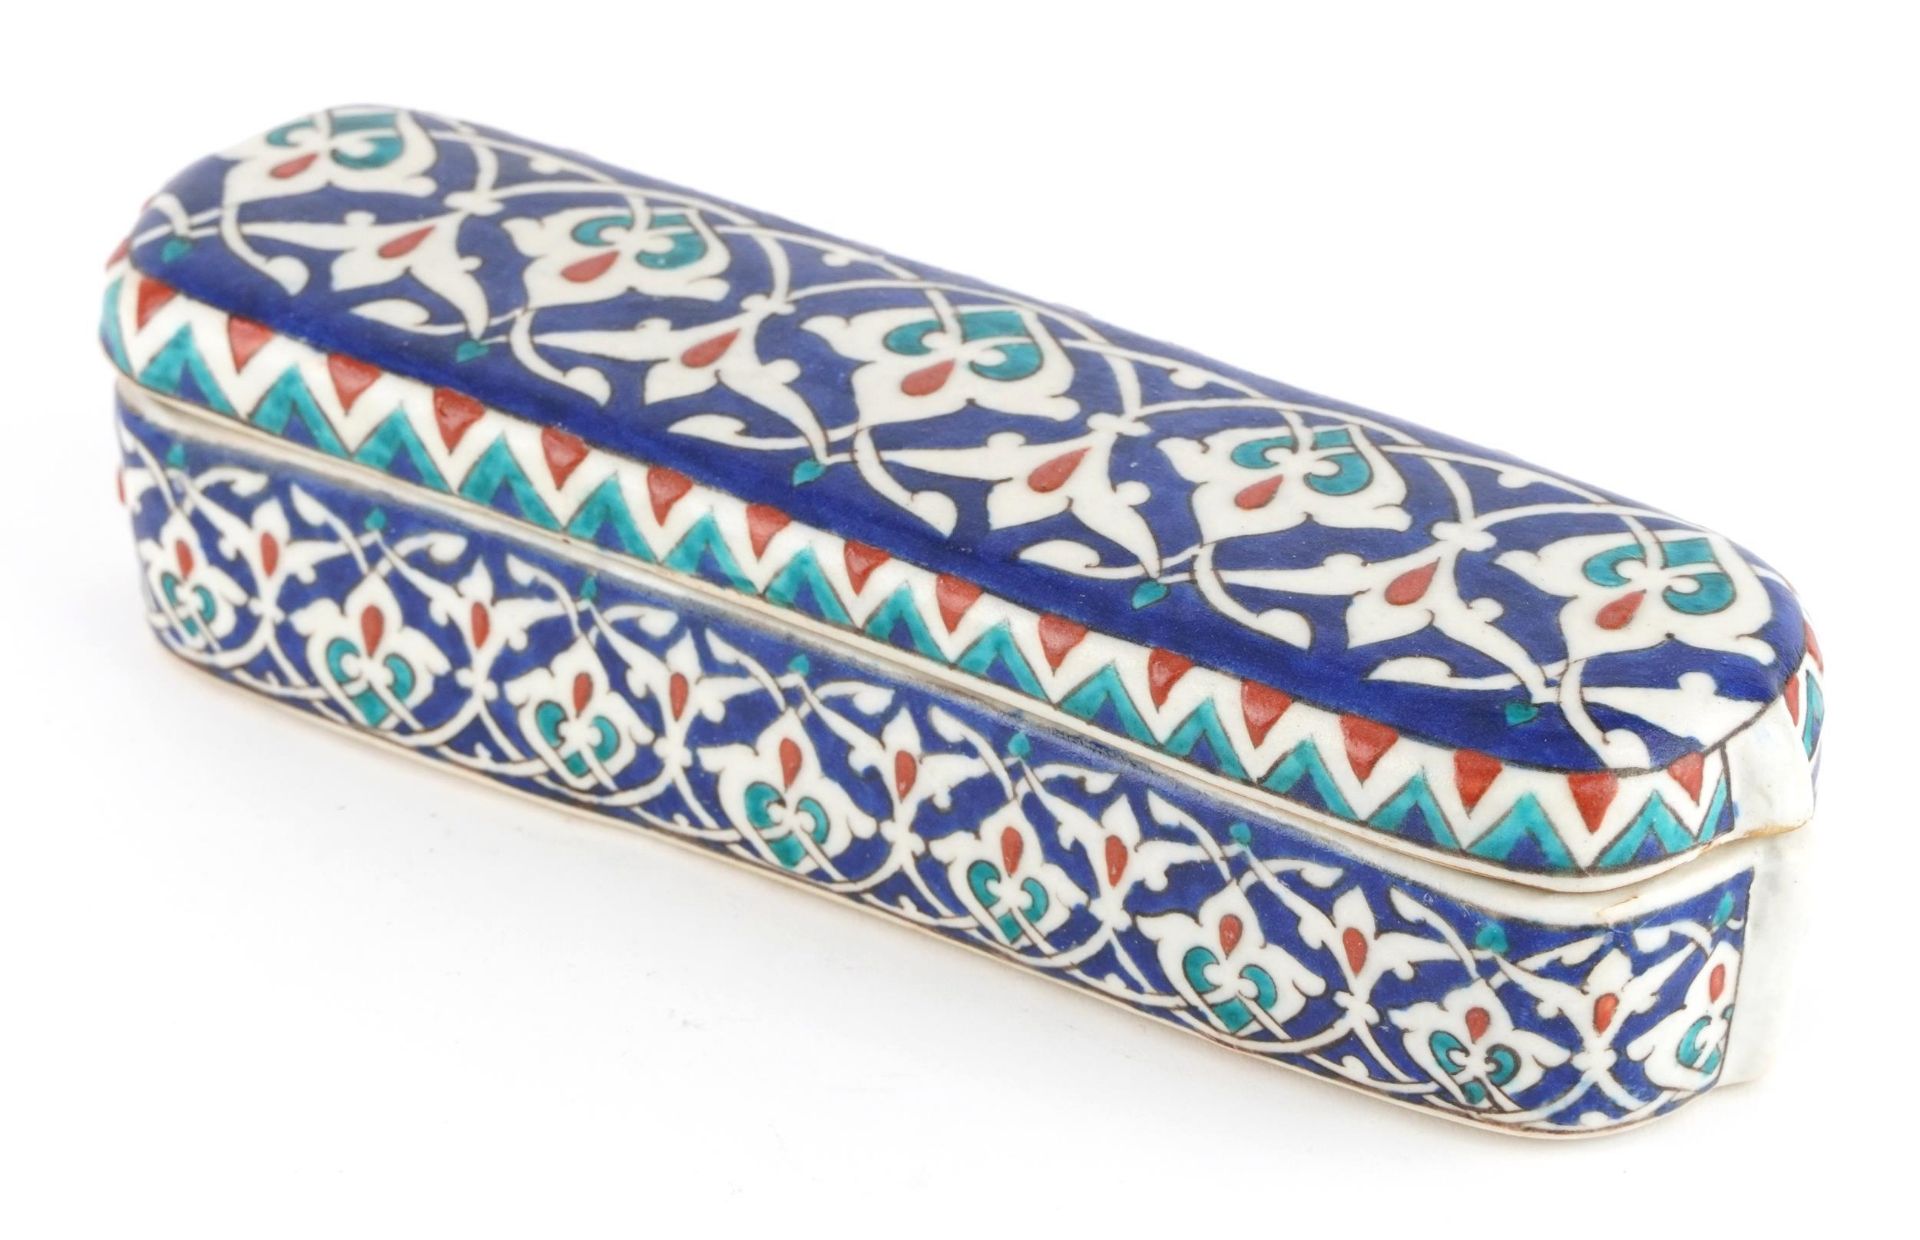 Turkish Iznik pottery pen box and cover, 23.5cm in length - Image 6 of 10